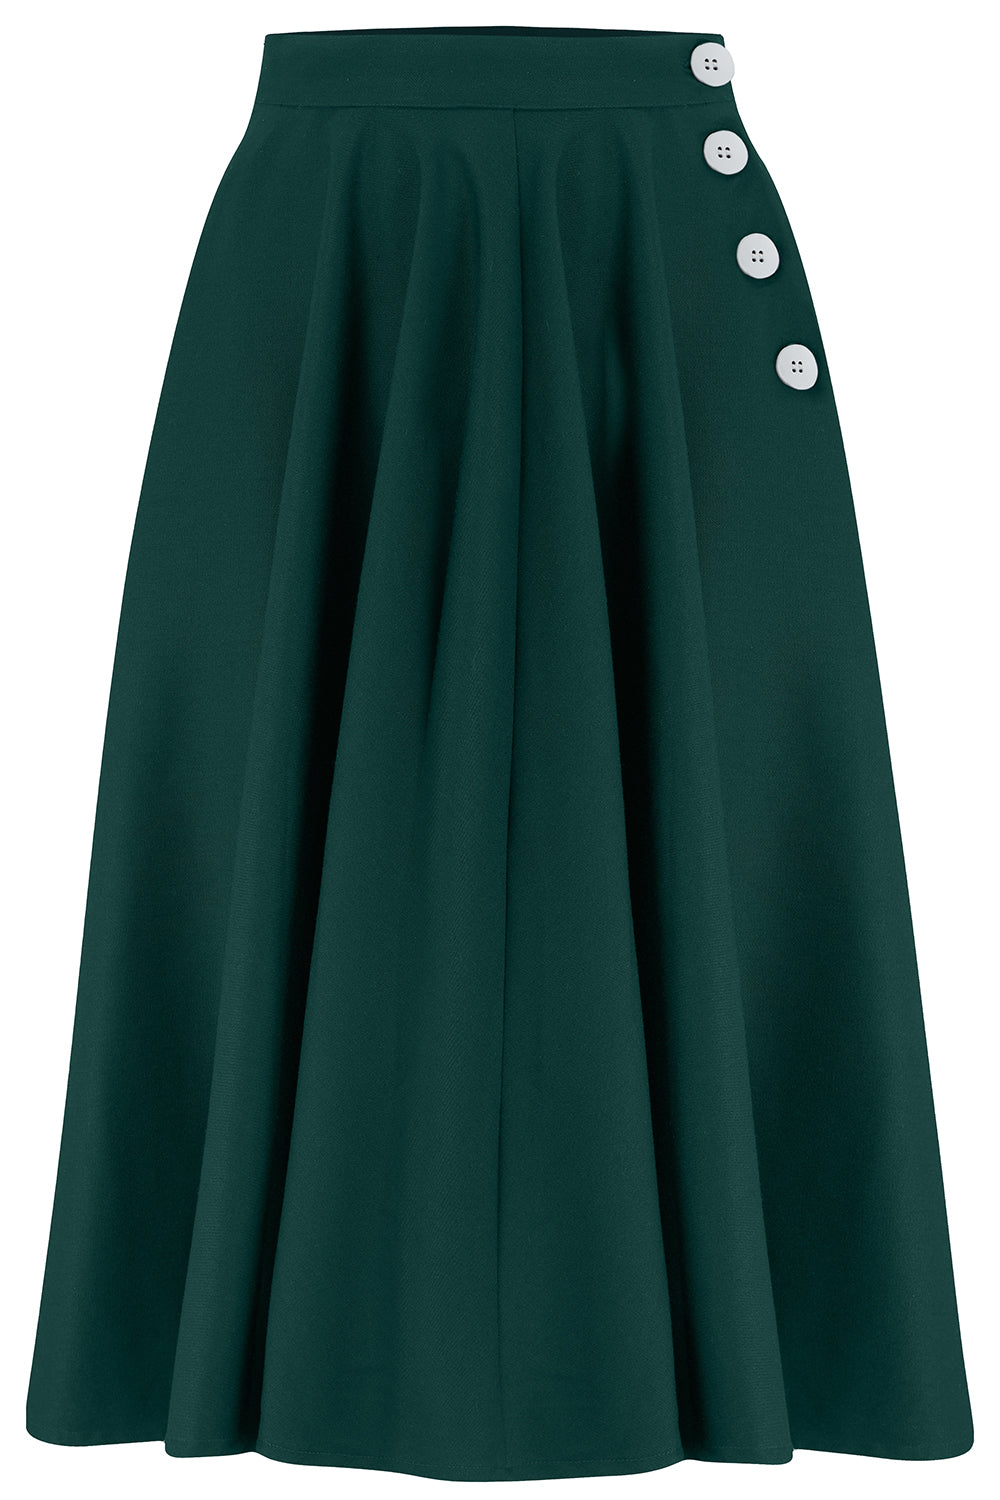 "Sylvia" Tailored Skirt in Solid Green , Classic & Authentic 1940s Vintage Inspired Style - CC41, Goodwood Revival, Twinwood Festival, Viva Las Vegas Rockabilly Weekend Rock n Romance The Seamstress Of Bloomsbury